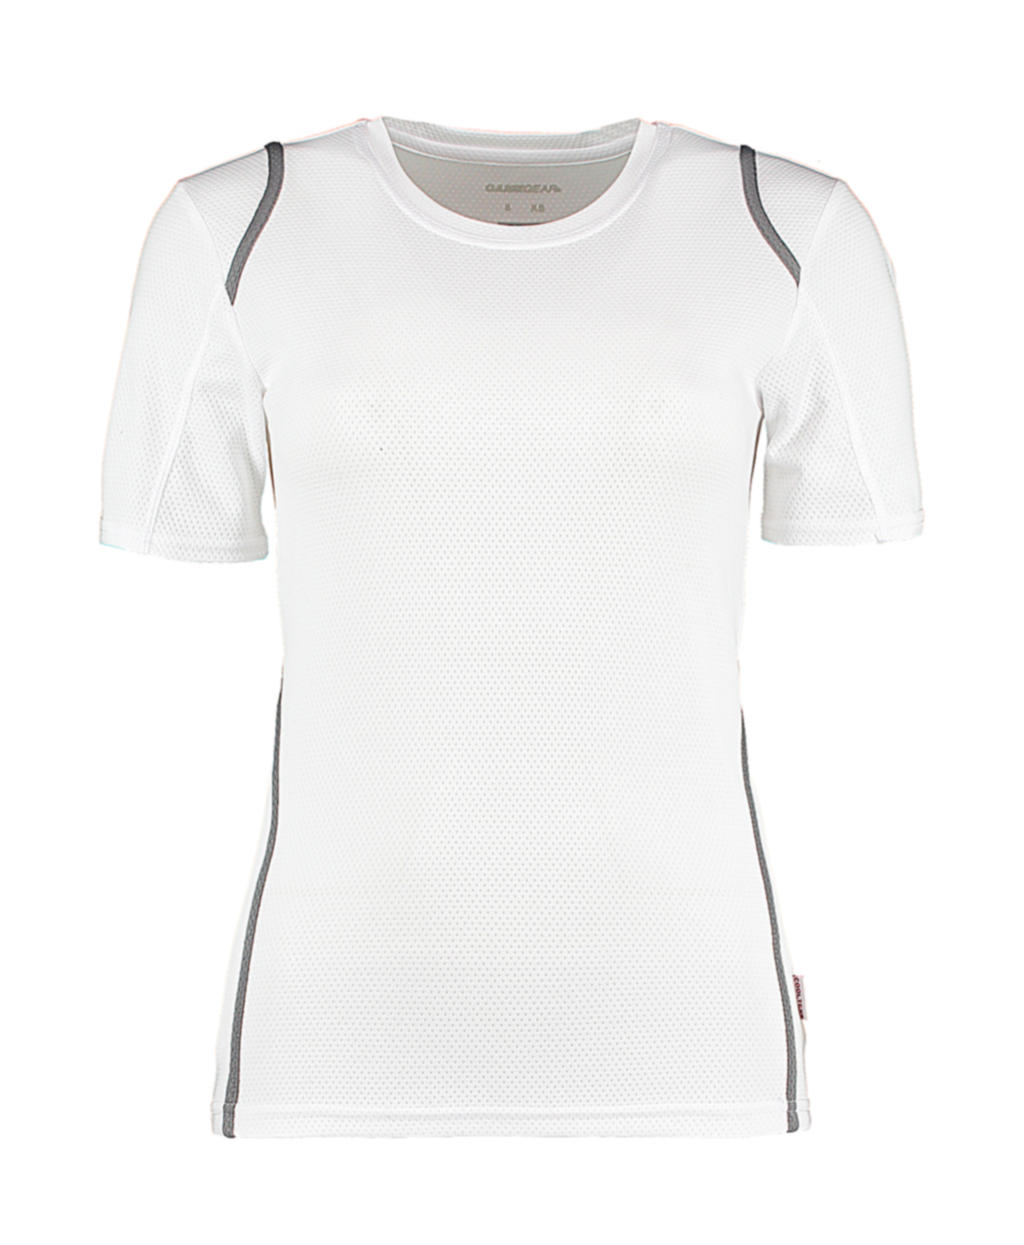  Womens Regular Fit Cooltex? Contrast Tee in Farbe White/Grey